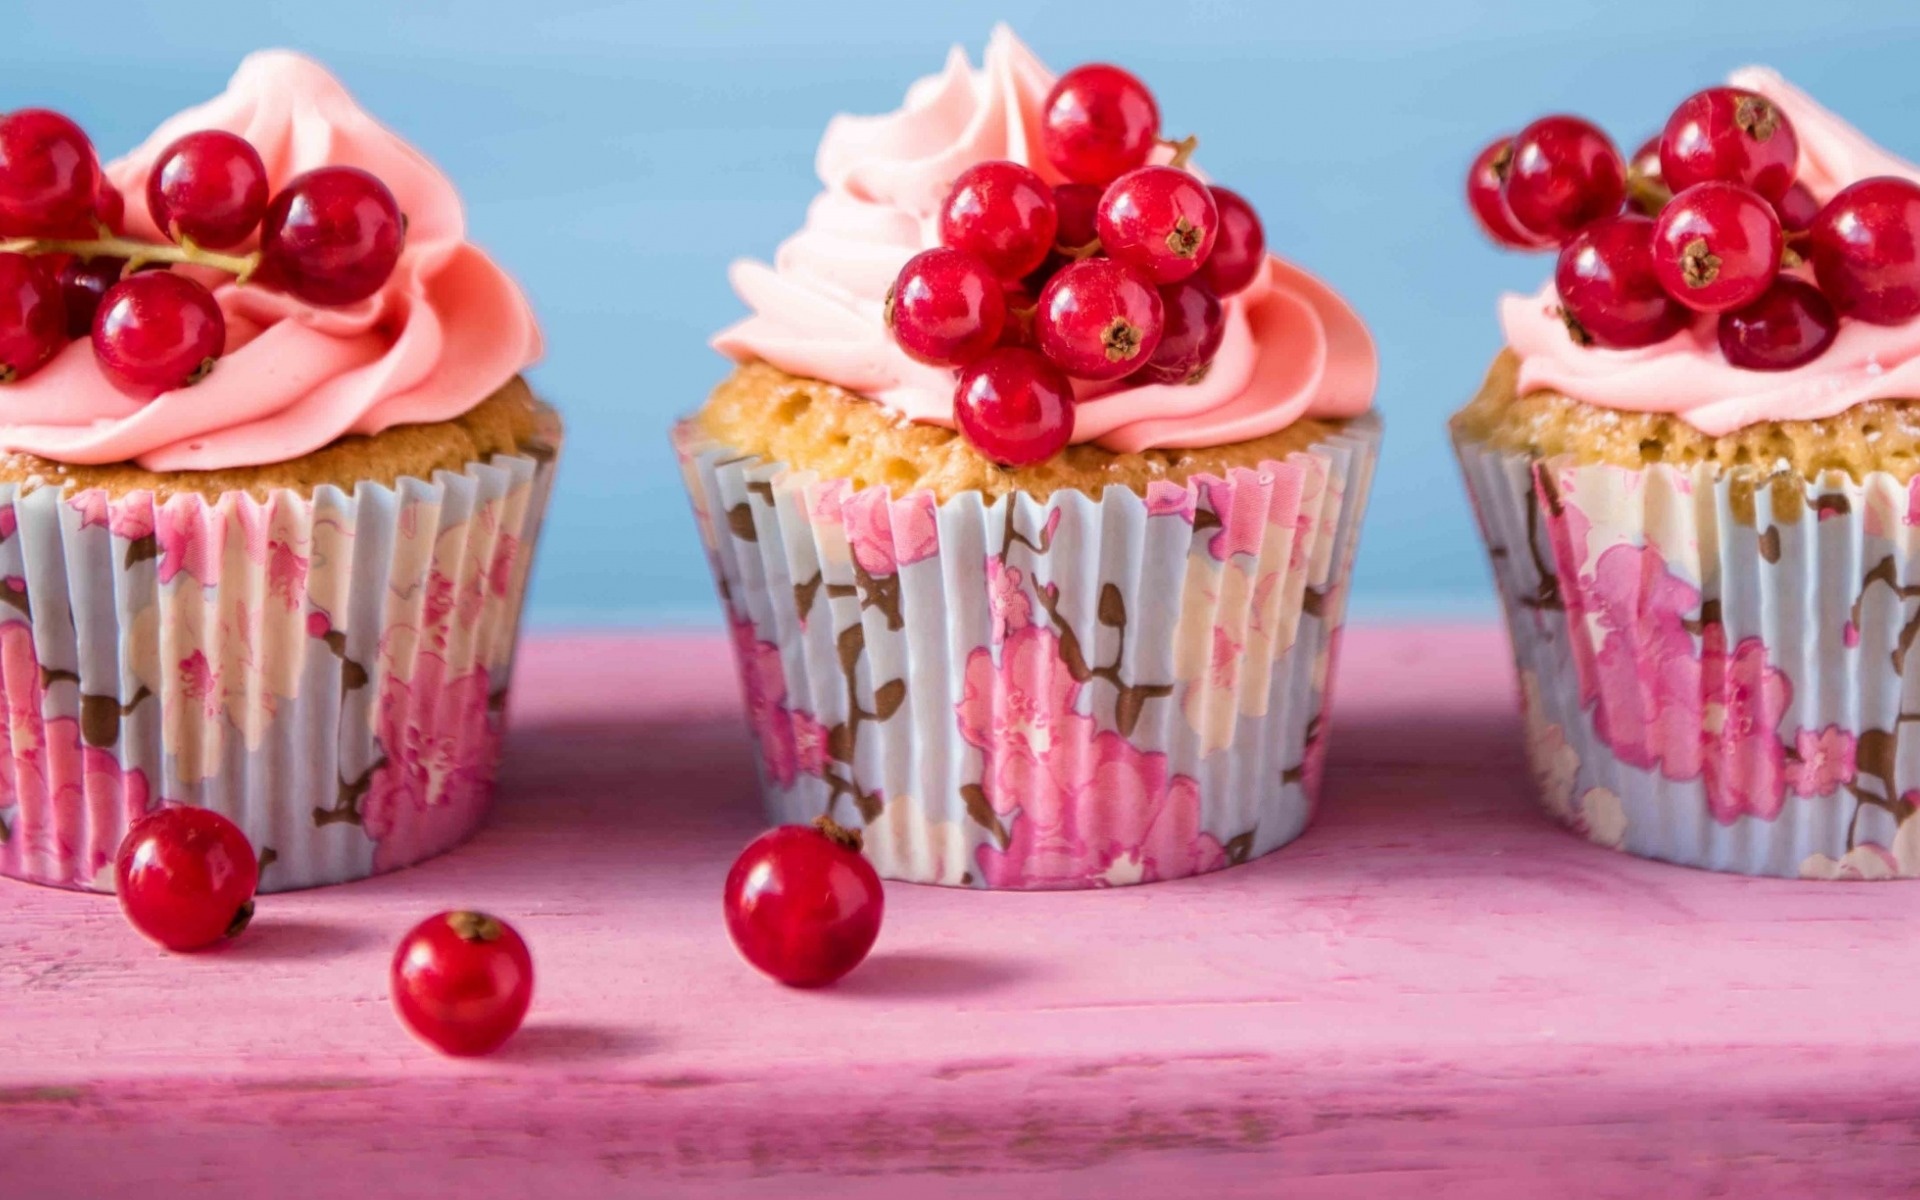 Cupcakes wallpapers, Berry delights, Scrumptious muffins, Tempting pastries, 1920x1200 HD Desktop